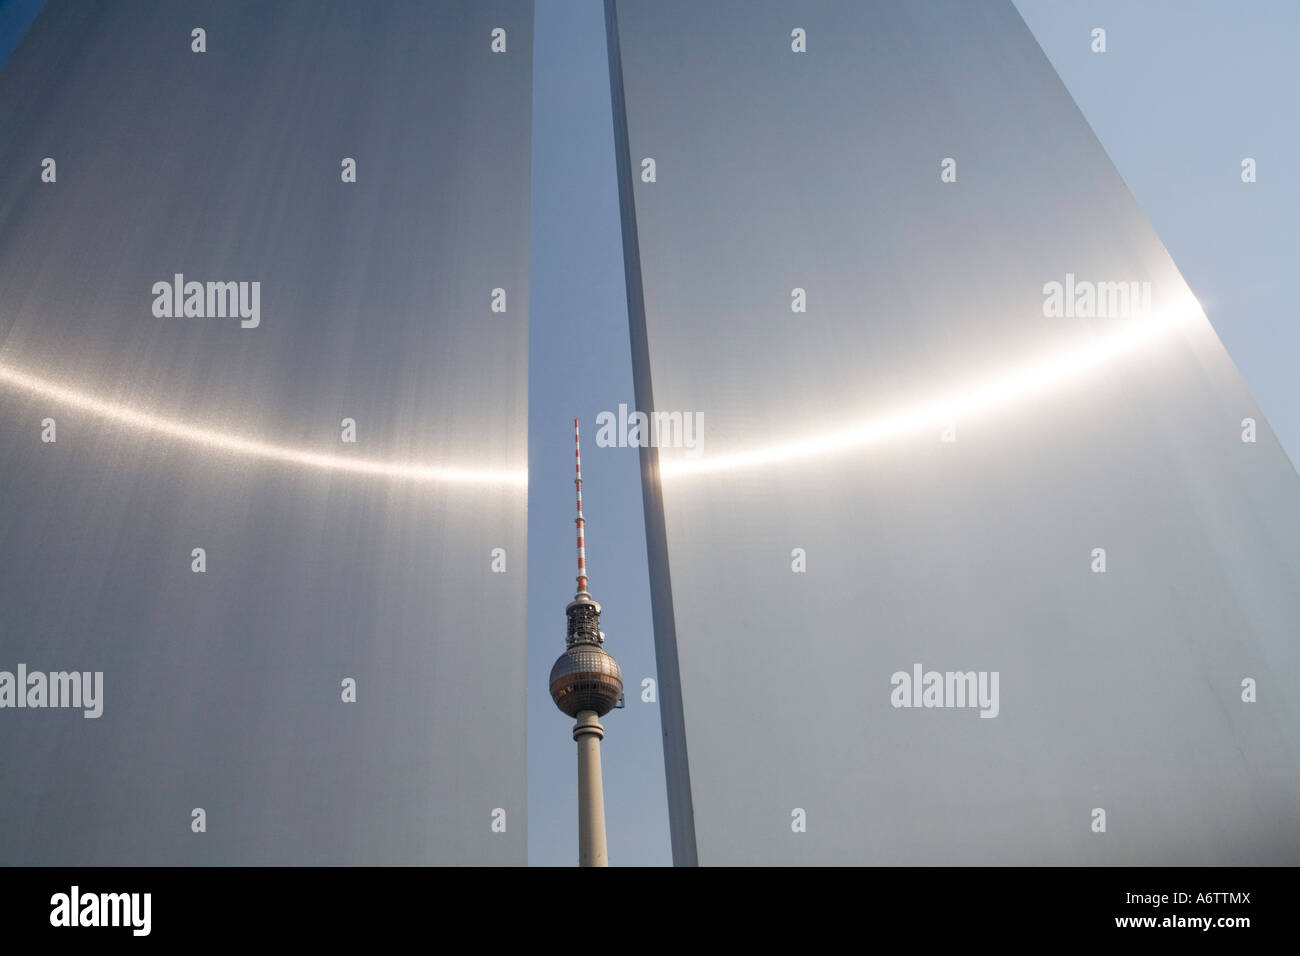 TV tower, seen through a gap between two info boards of Marx Engels forum, Berlin, Germany, Europe Stock Photo